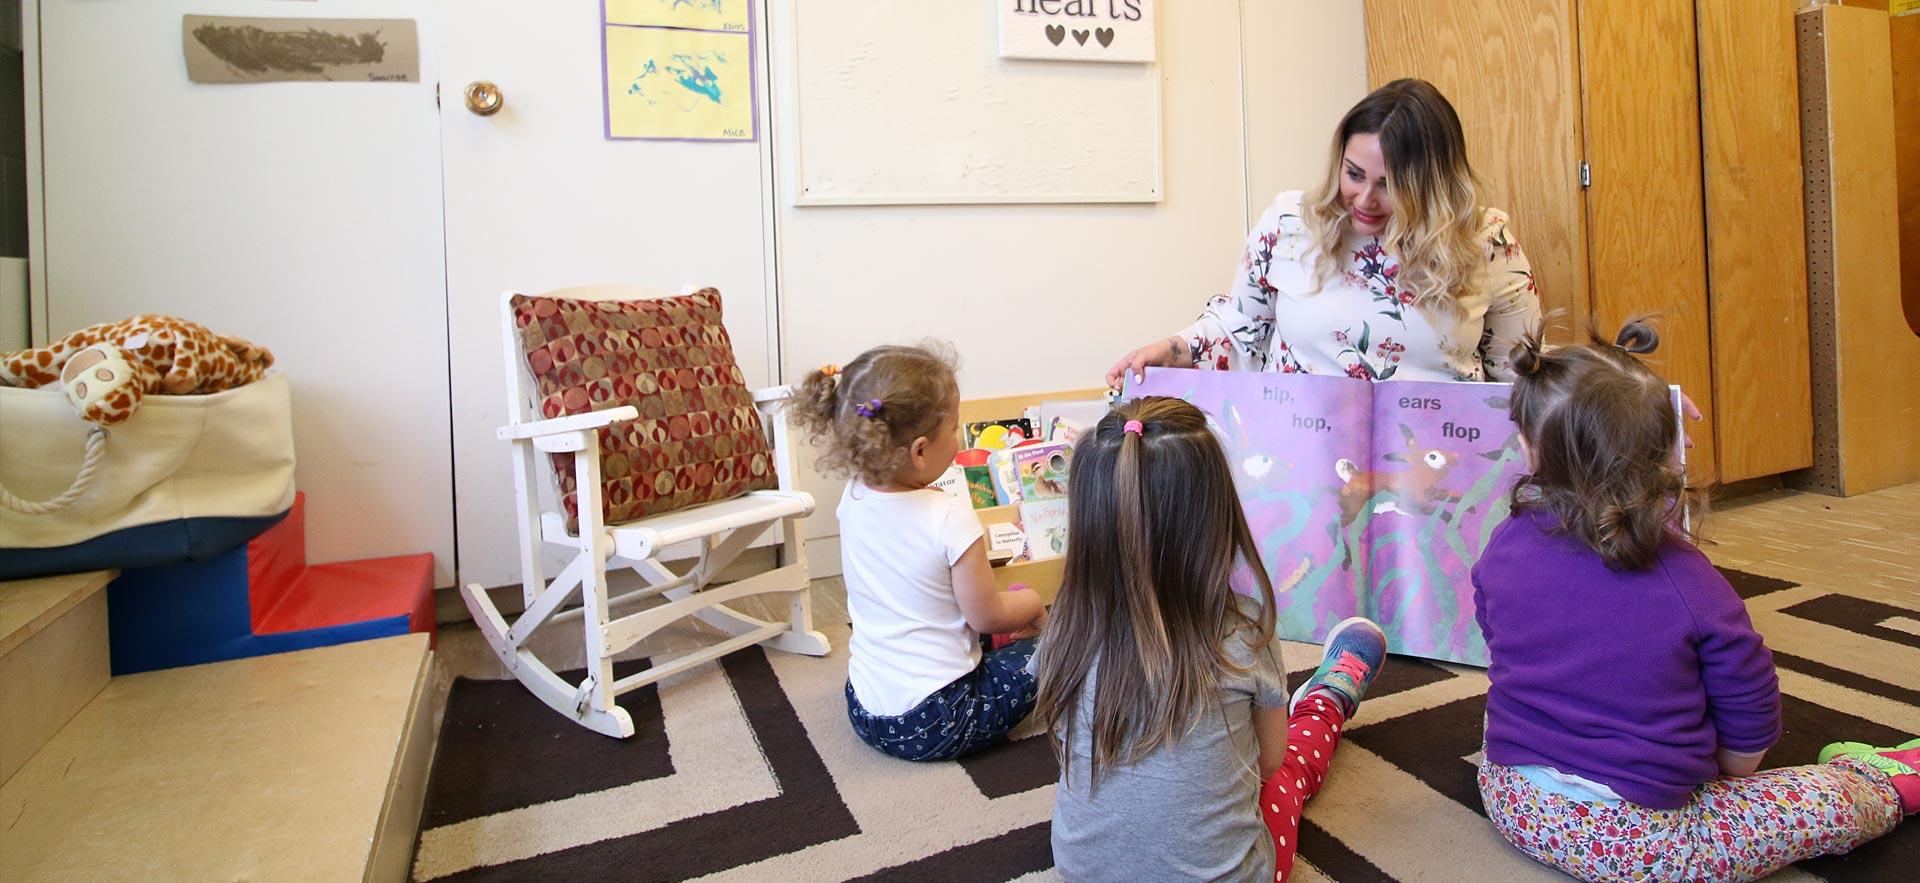 One female Early Childhood Education student reads a story book to some young children. 